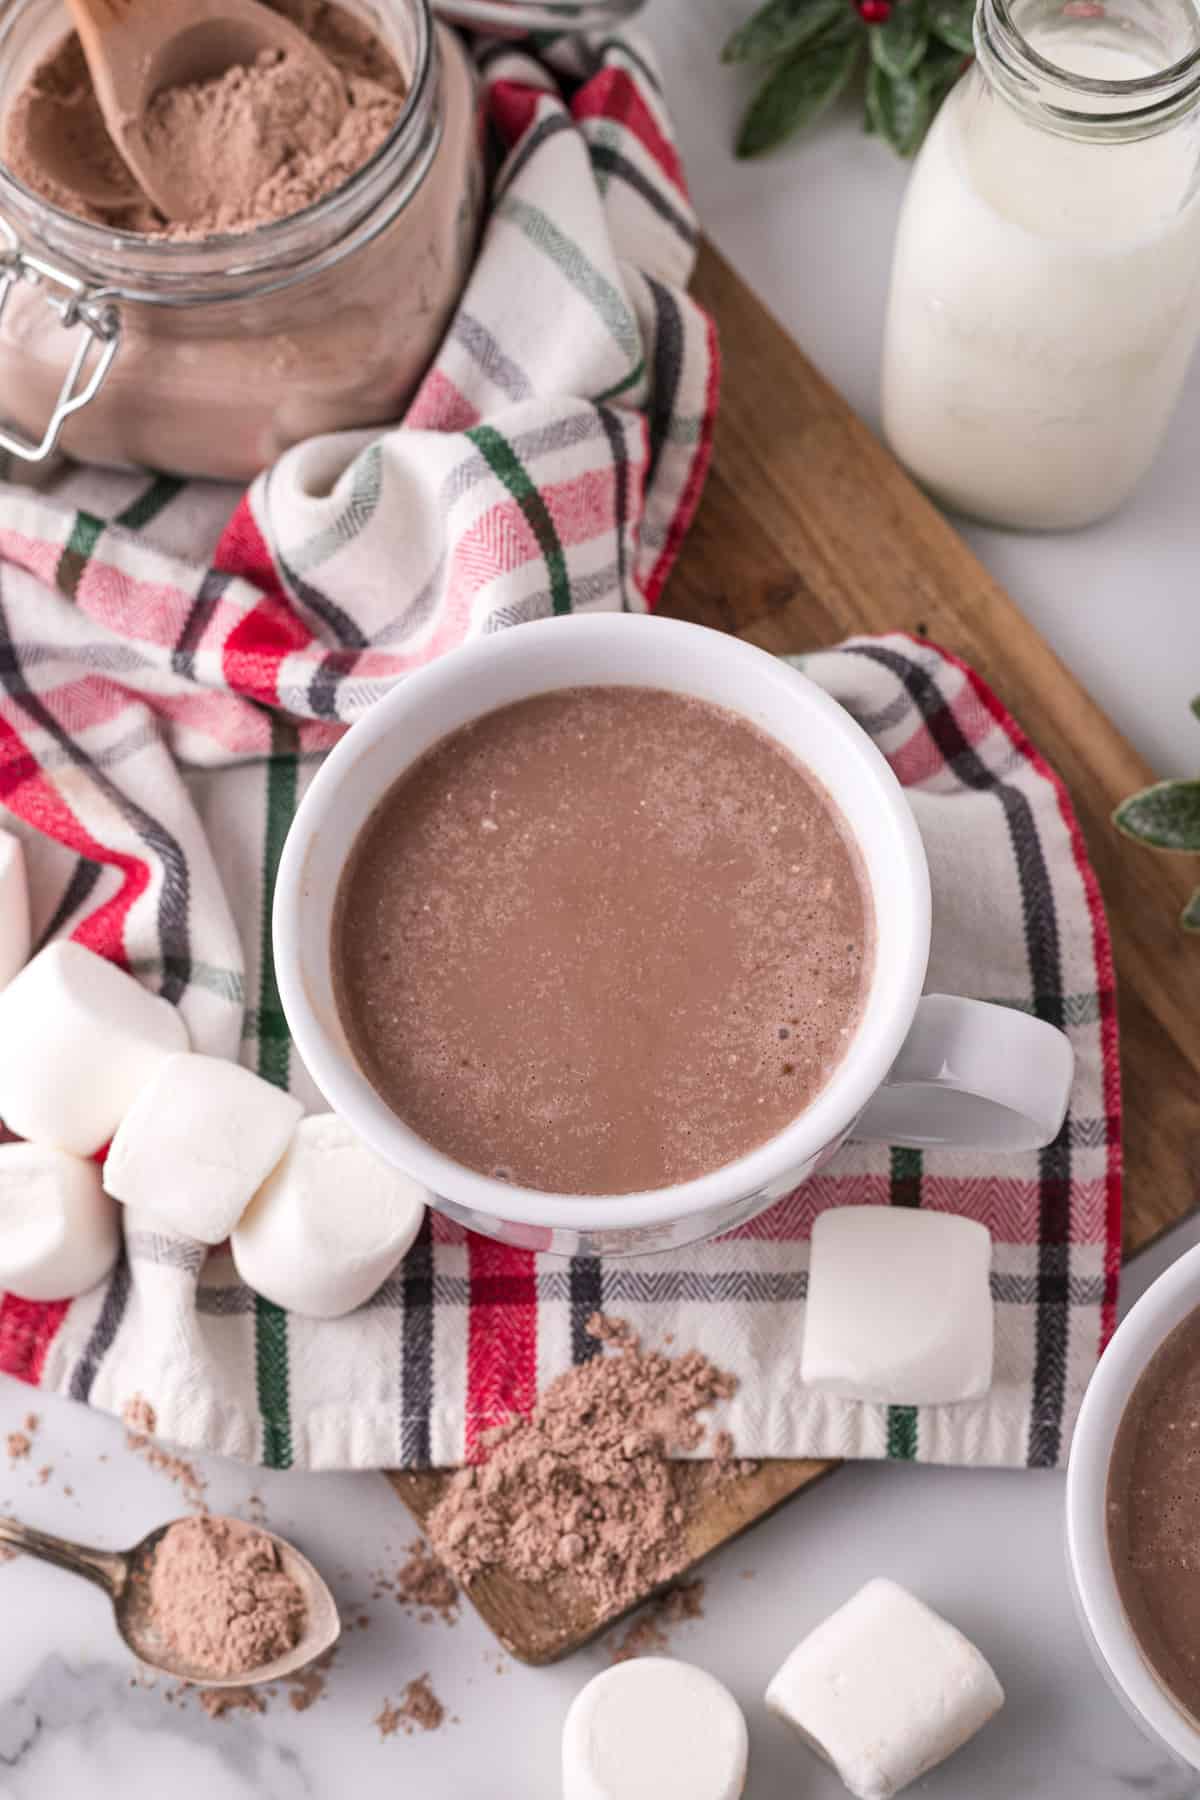 Overhead view of hot chocolate in a white mug.